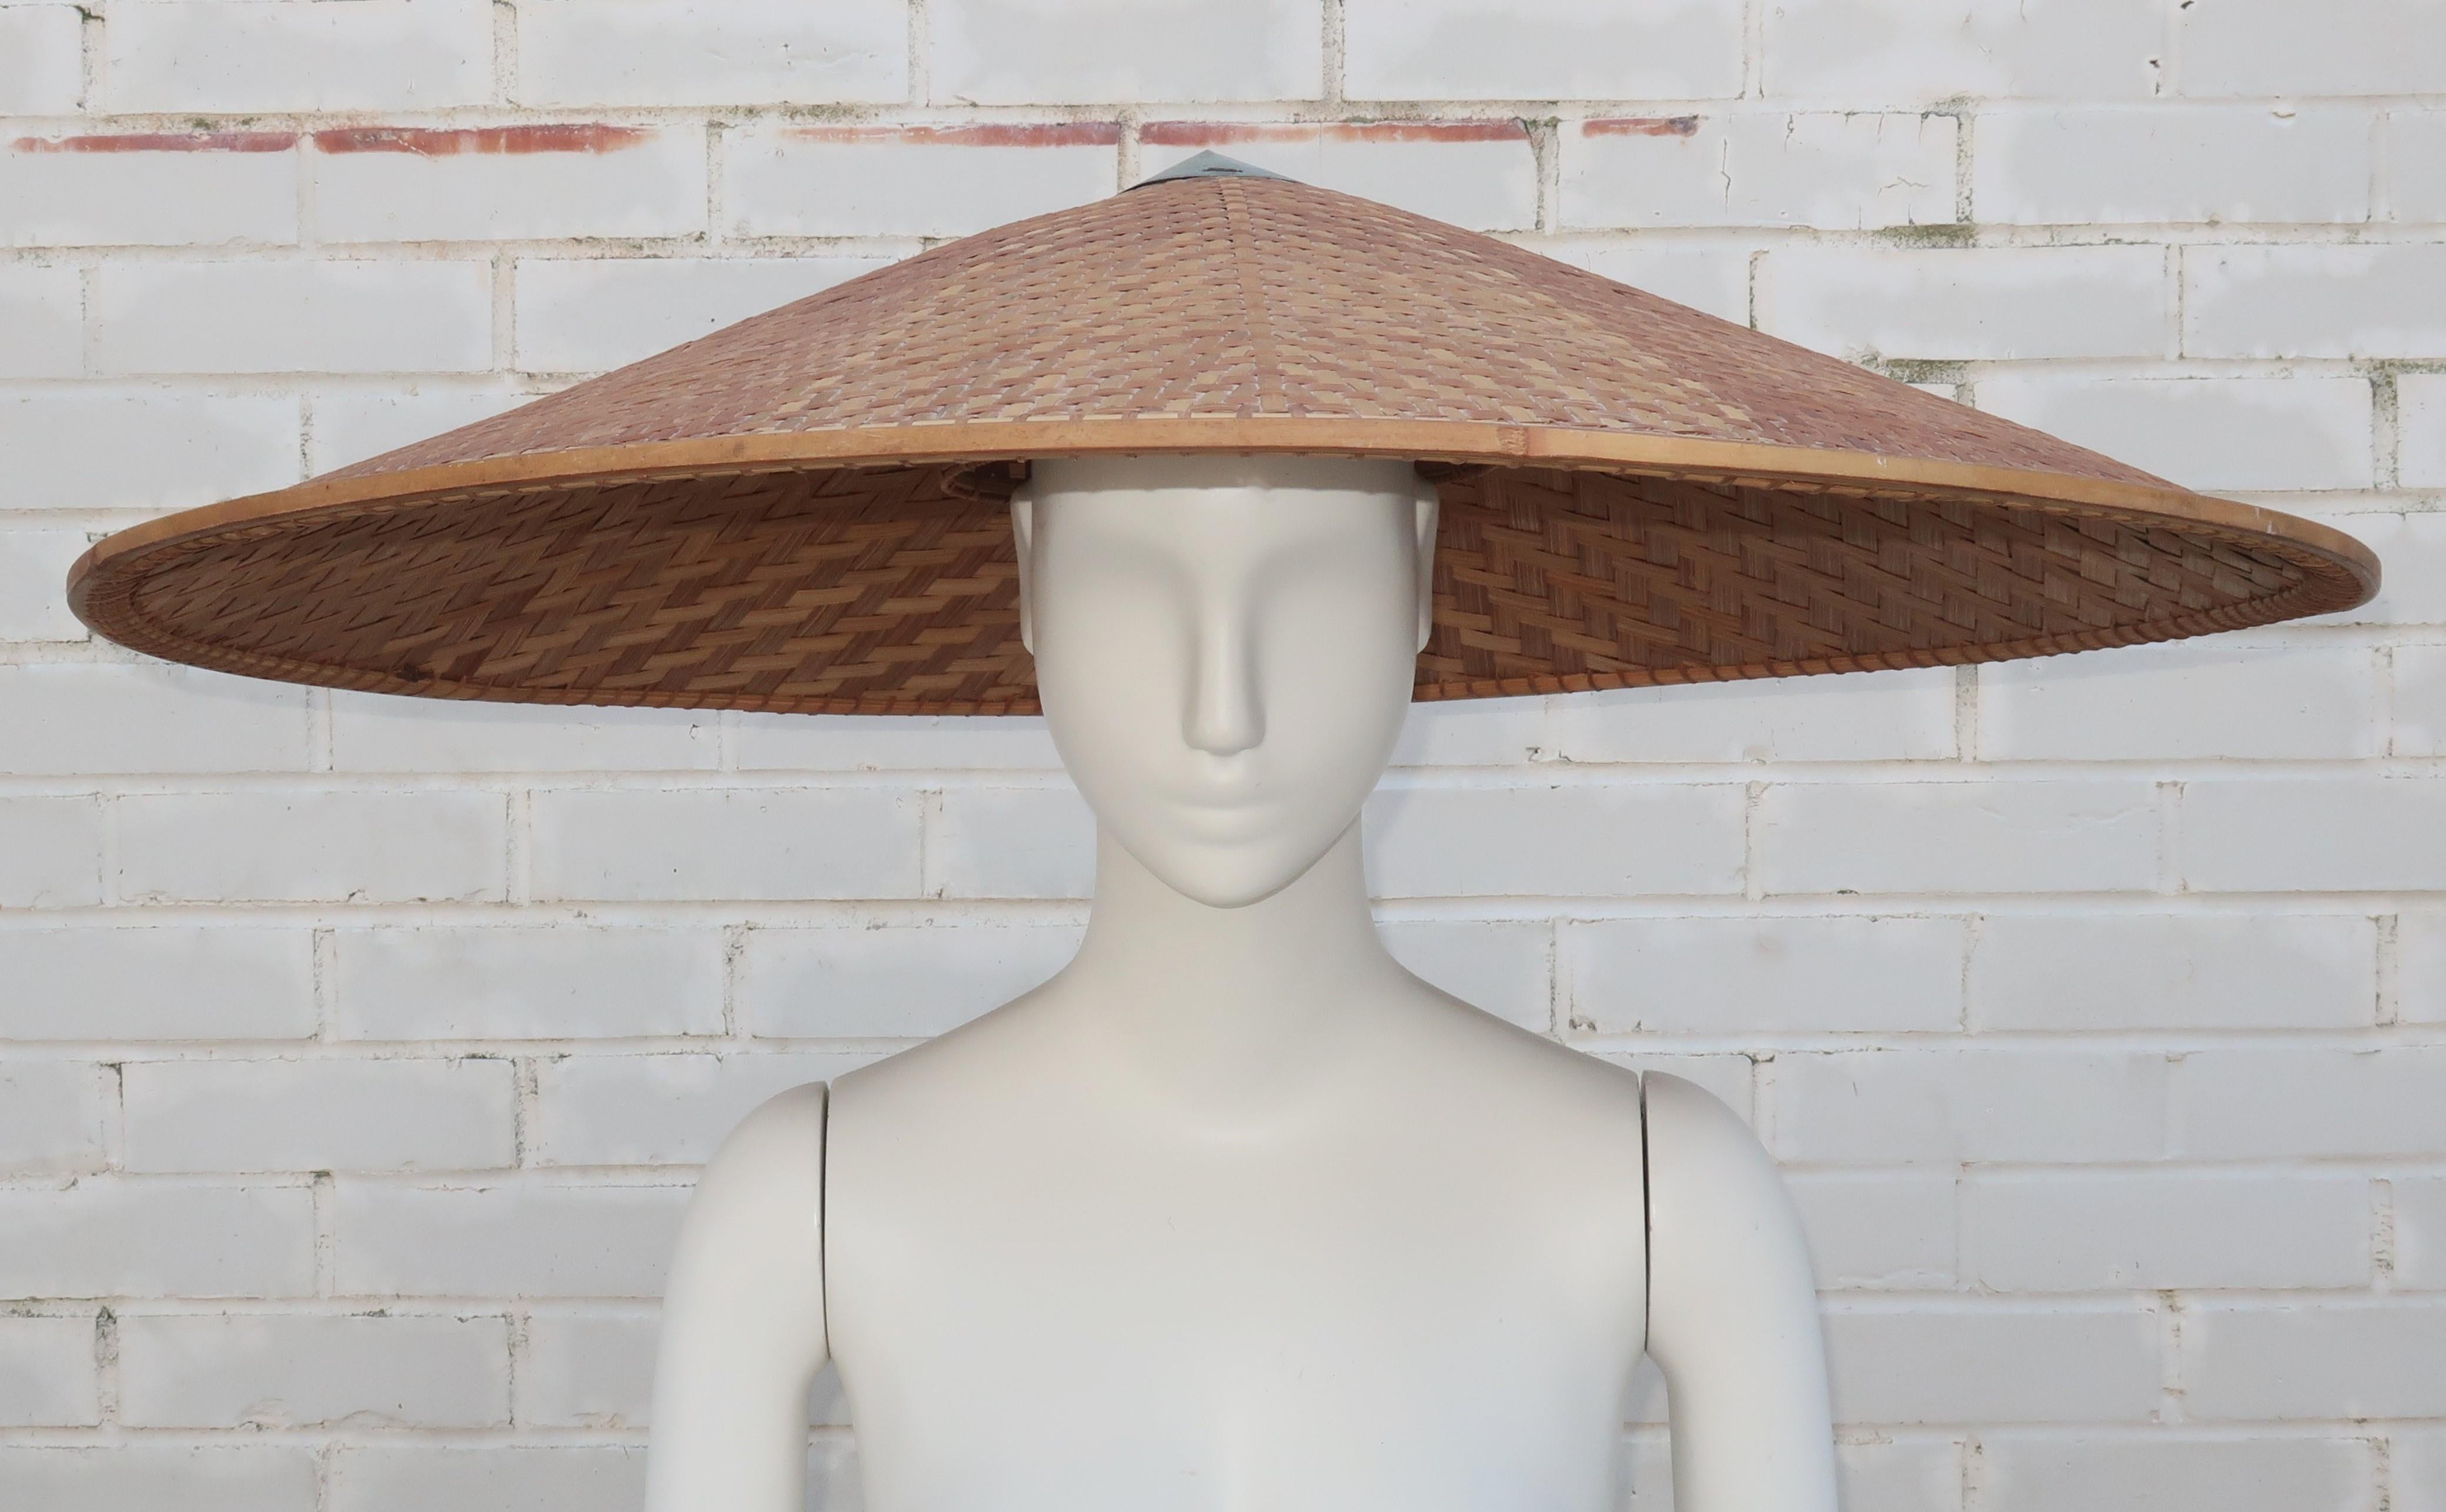 Who needs an umbrella when you have this fabulous hat!?!  It's a 1950's extra large woven wicker hat with a bamboo and straw rim and a metal cap.  The interior is outfitted with a lattice band which keeps the topper in place.  There is a metal hook